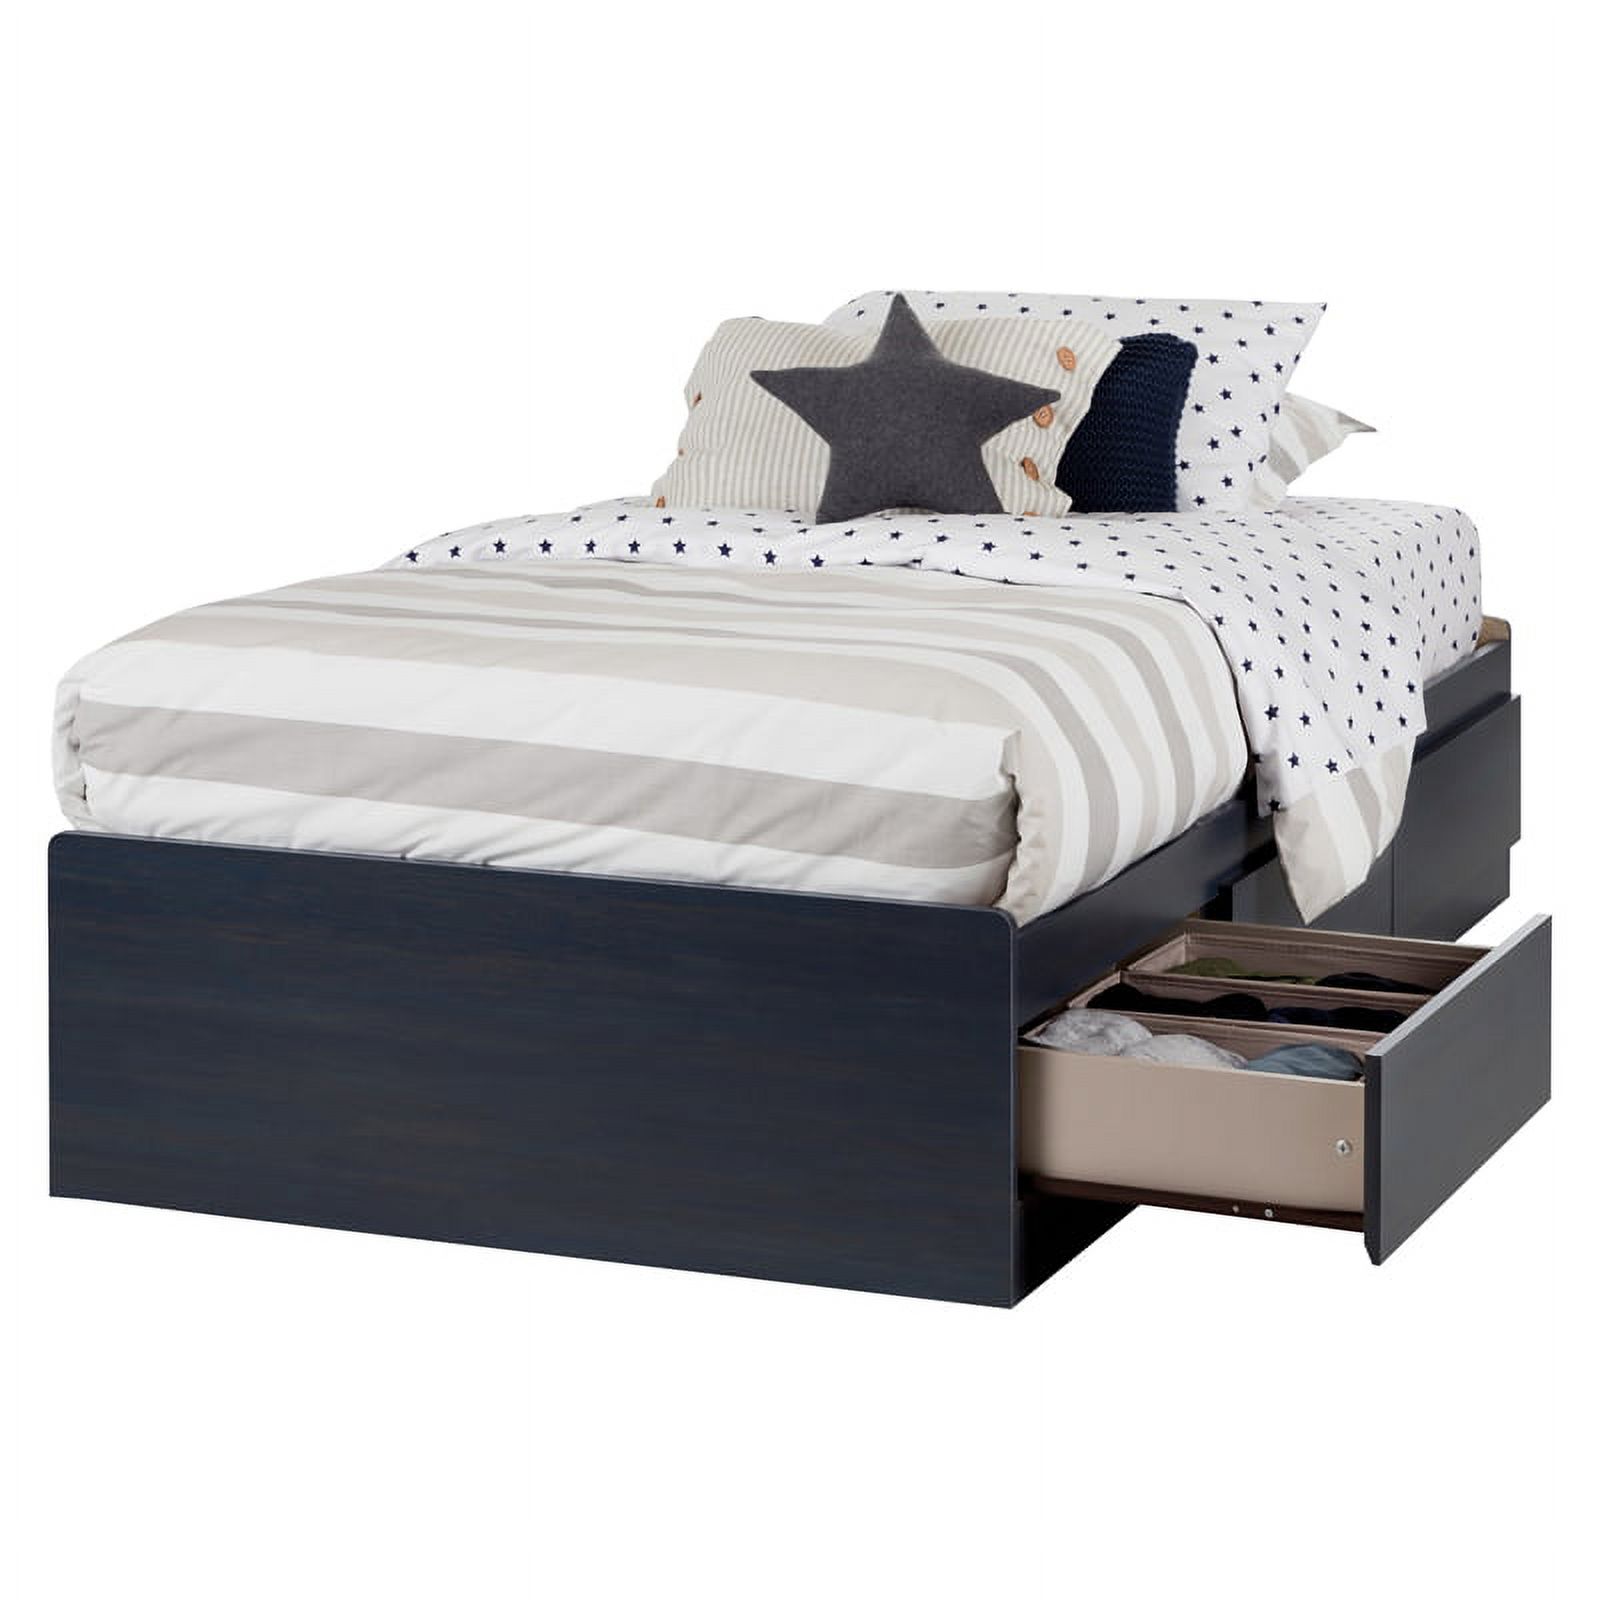 Twin Mates Bed and 1 Nightstand Set in Blueberry - image 1 of 5